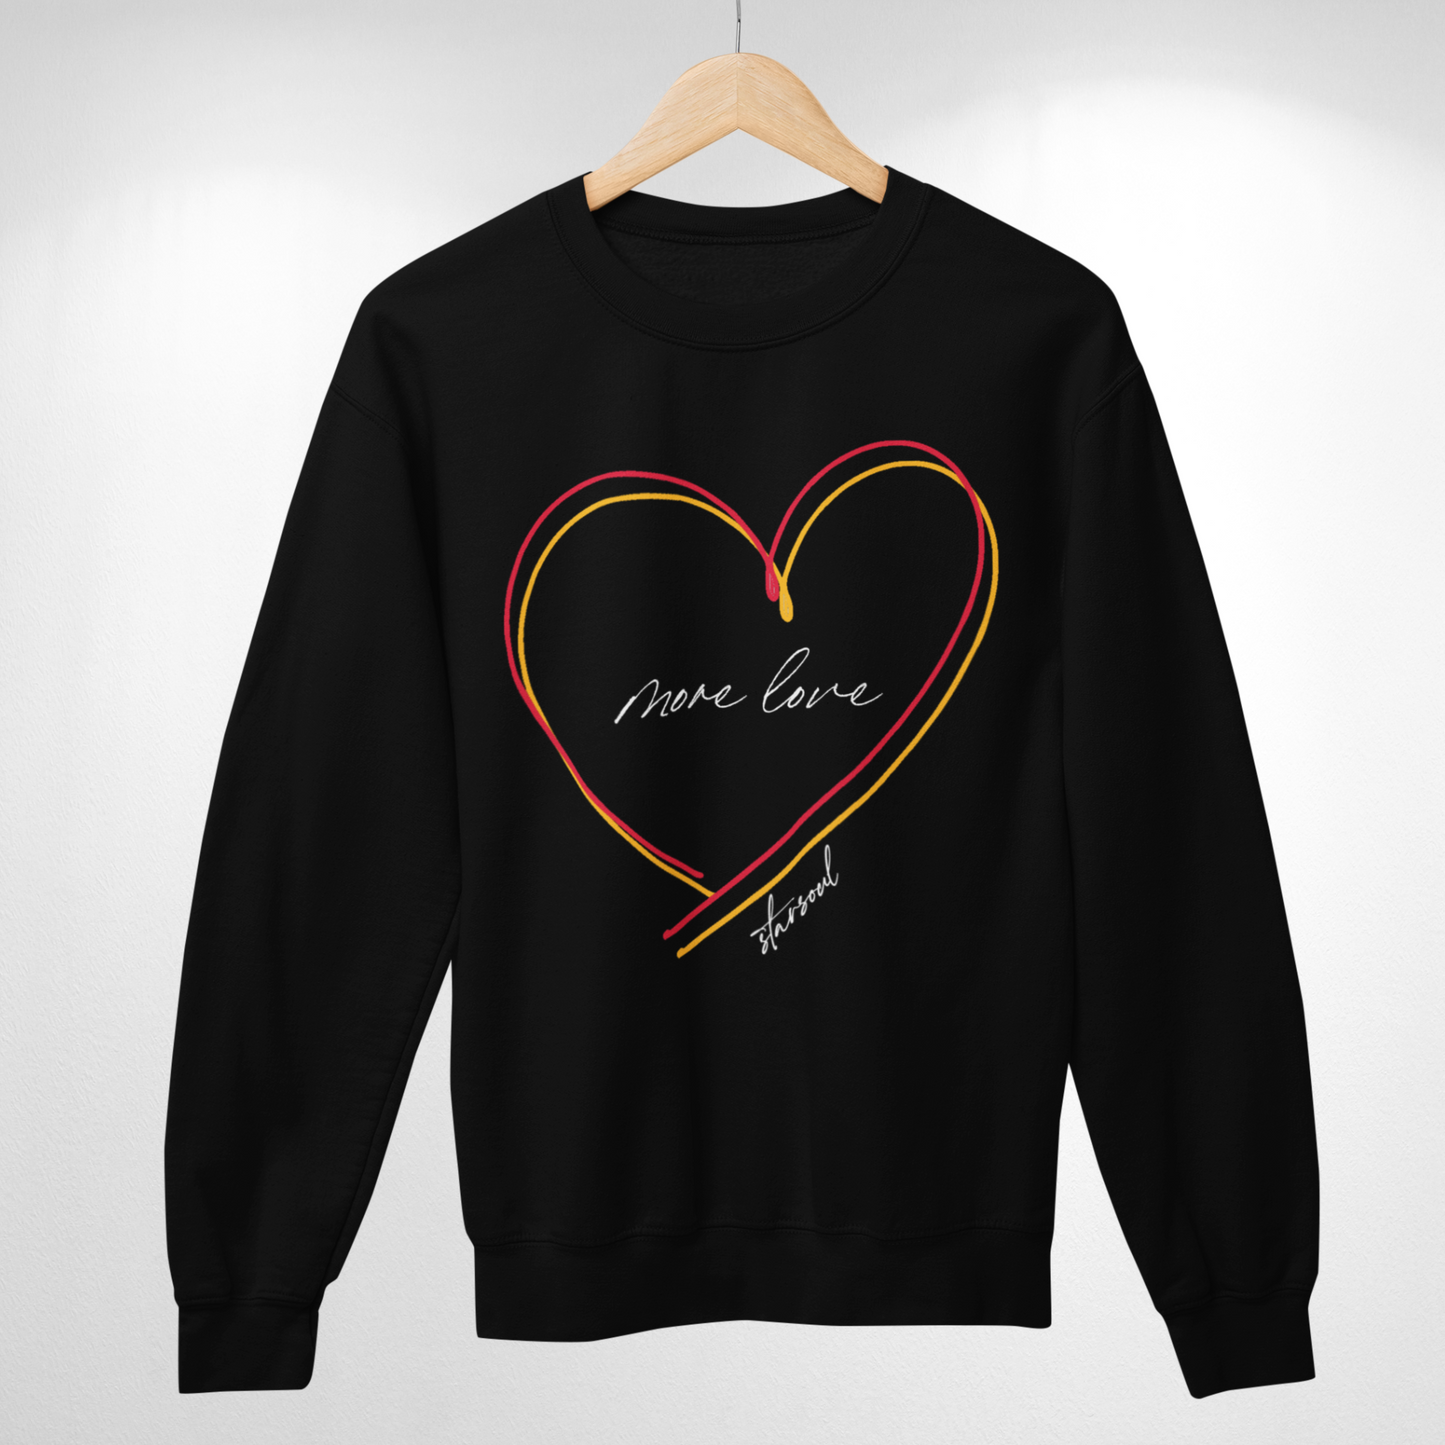 black sweatshirt with yellow and red heart (text: more love).Every purchase from the #KCstrong collection donates 100% of the proceeds to the Kansas City Strong emergency fund created by the Chiefs and the United Way of Kansas City.